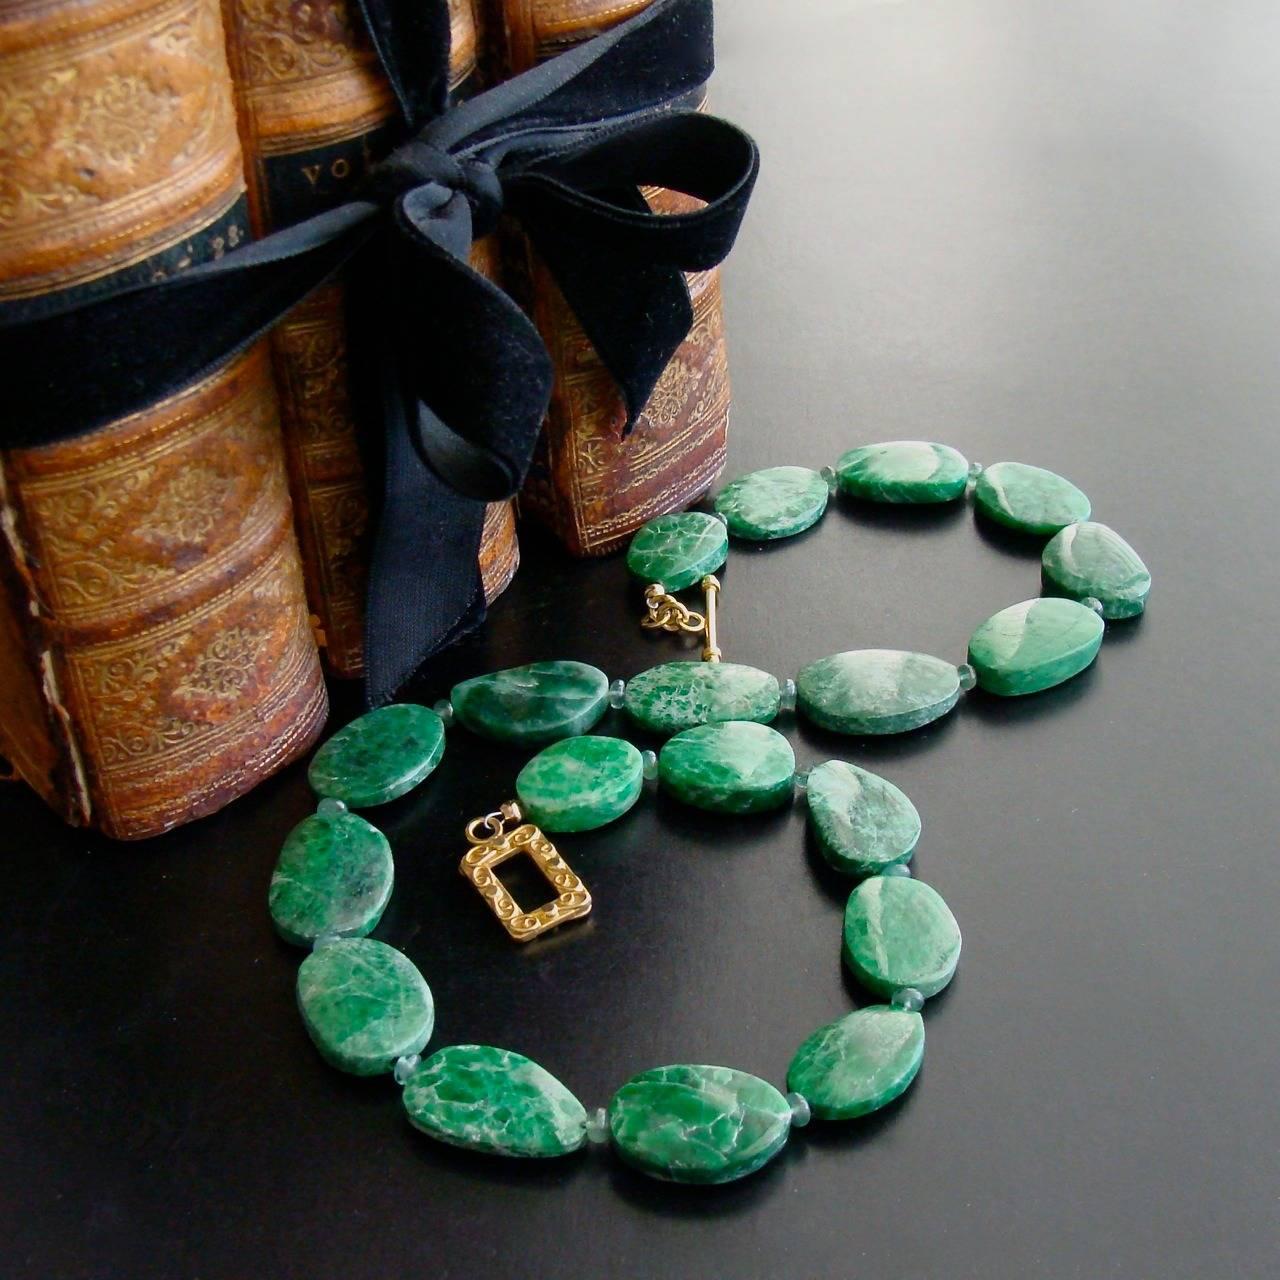 Mayra Necklace.

If you have never heard of the gemstone called Maw Sit Sit - you are not alone.  Its distinctive brilliant emerald green color sets it apart in the world of gemstones and it is highly coveted among collectors.  It is found